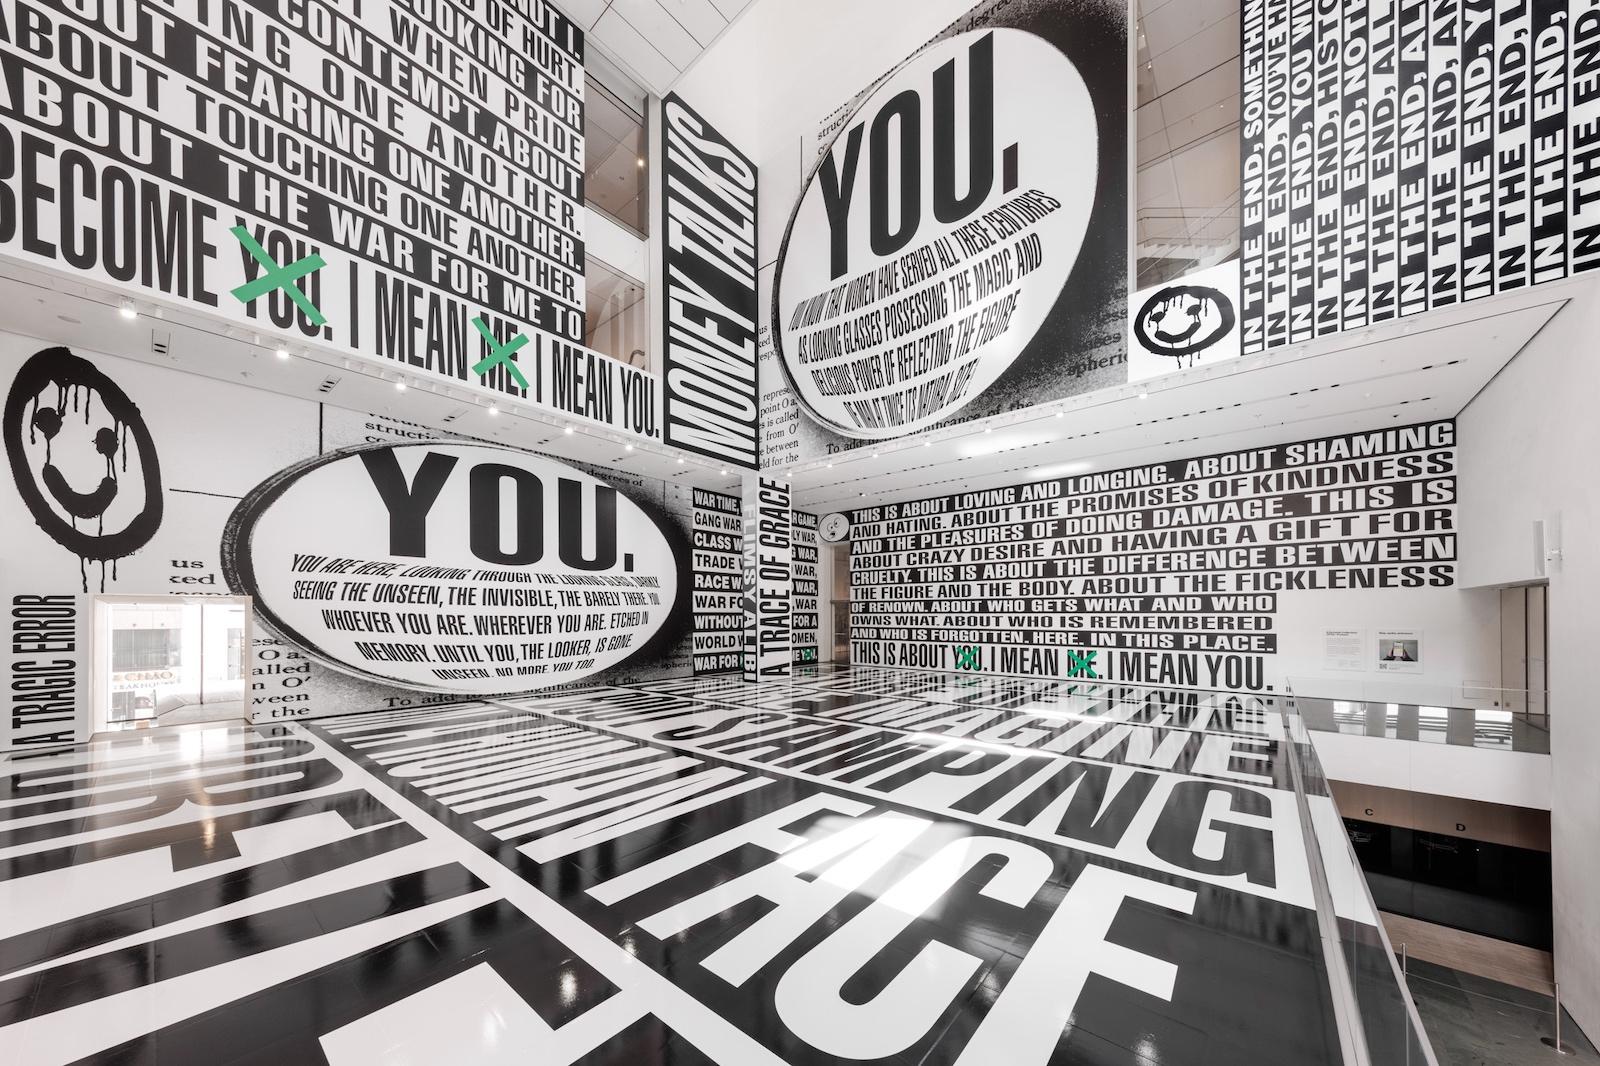 Barbara Kruger Zwirner and MoMA Shows Speak to Past and Present Art and Object